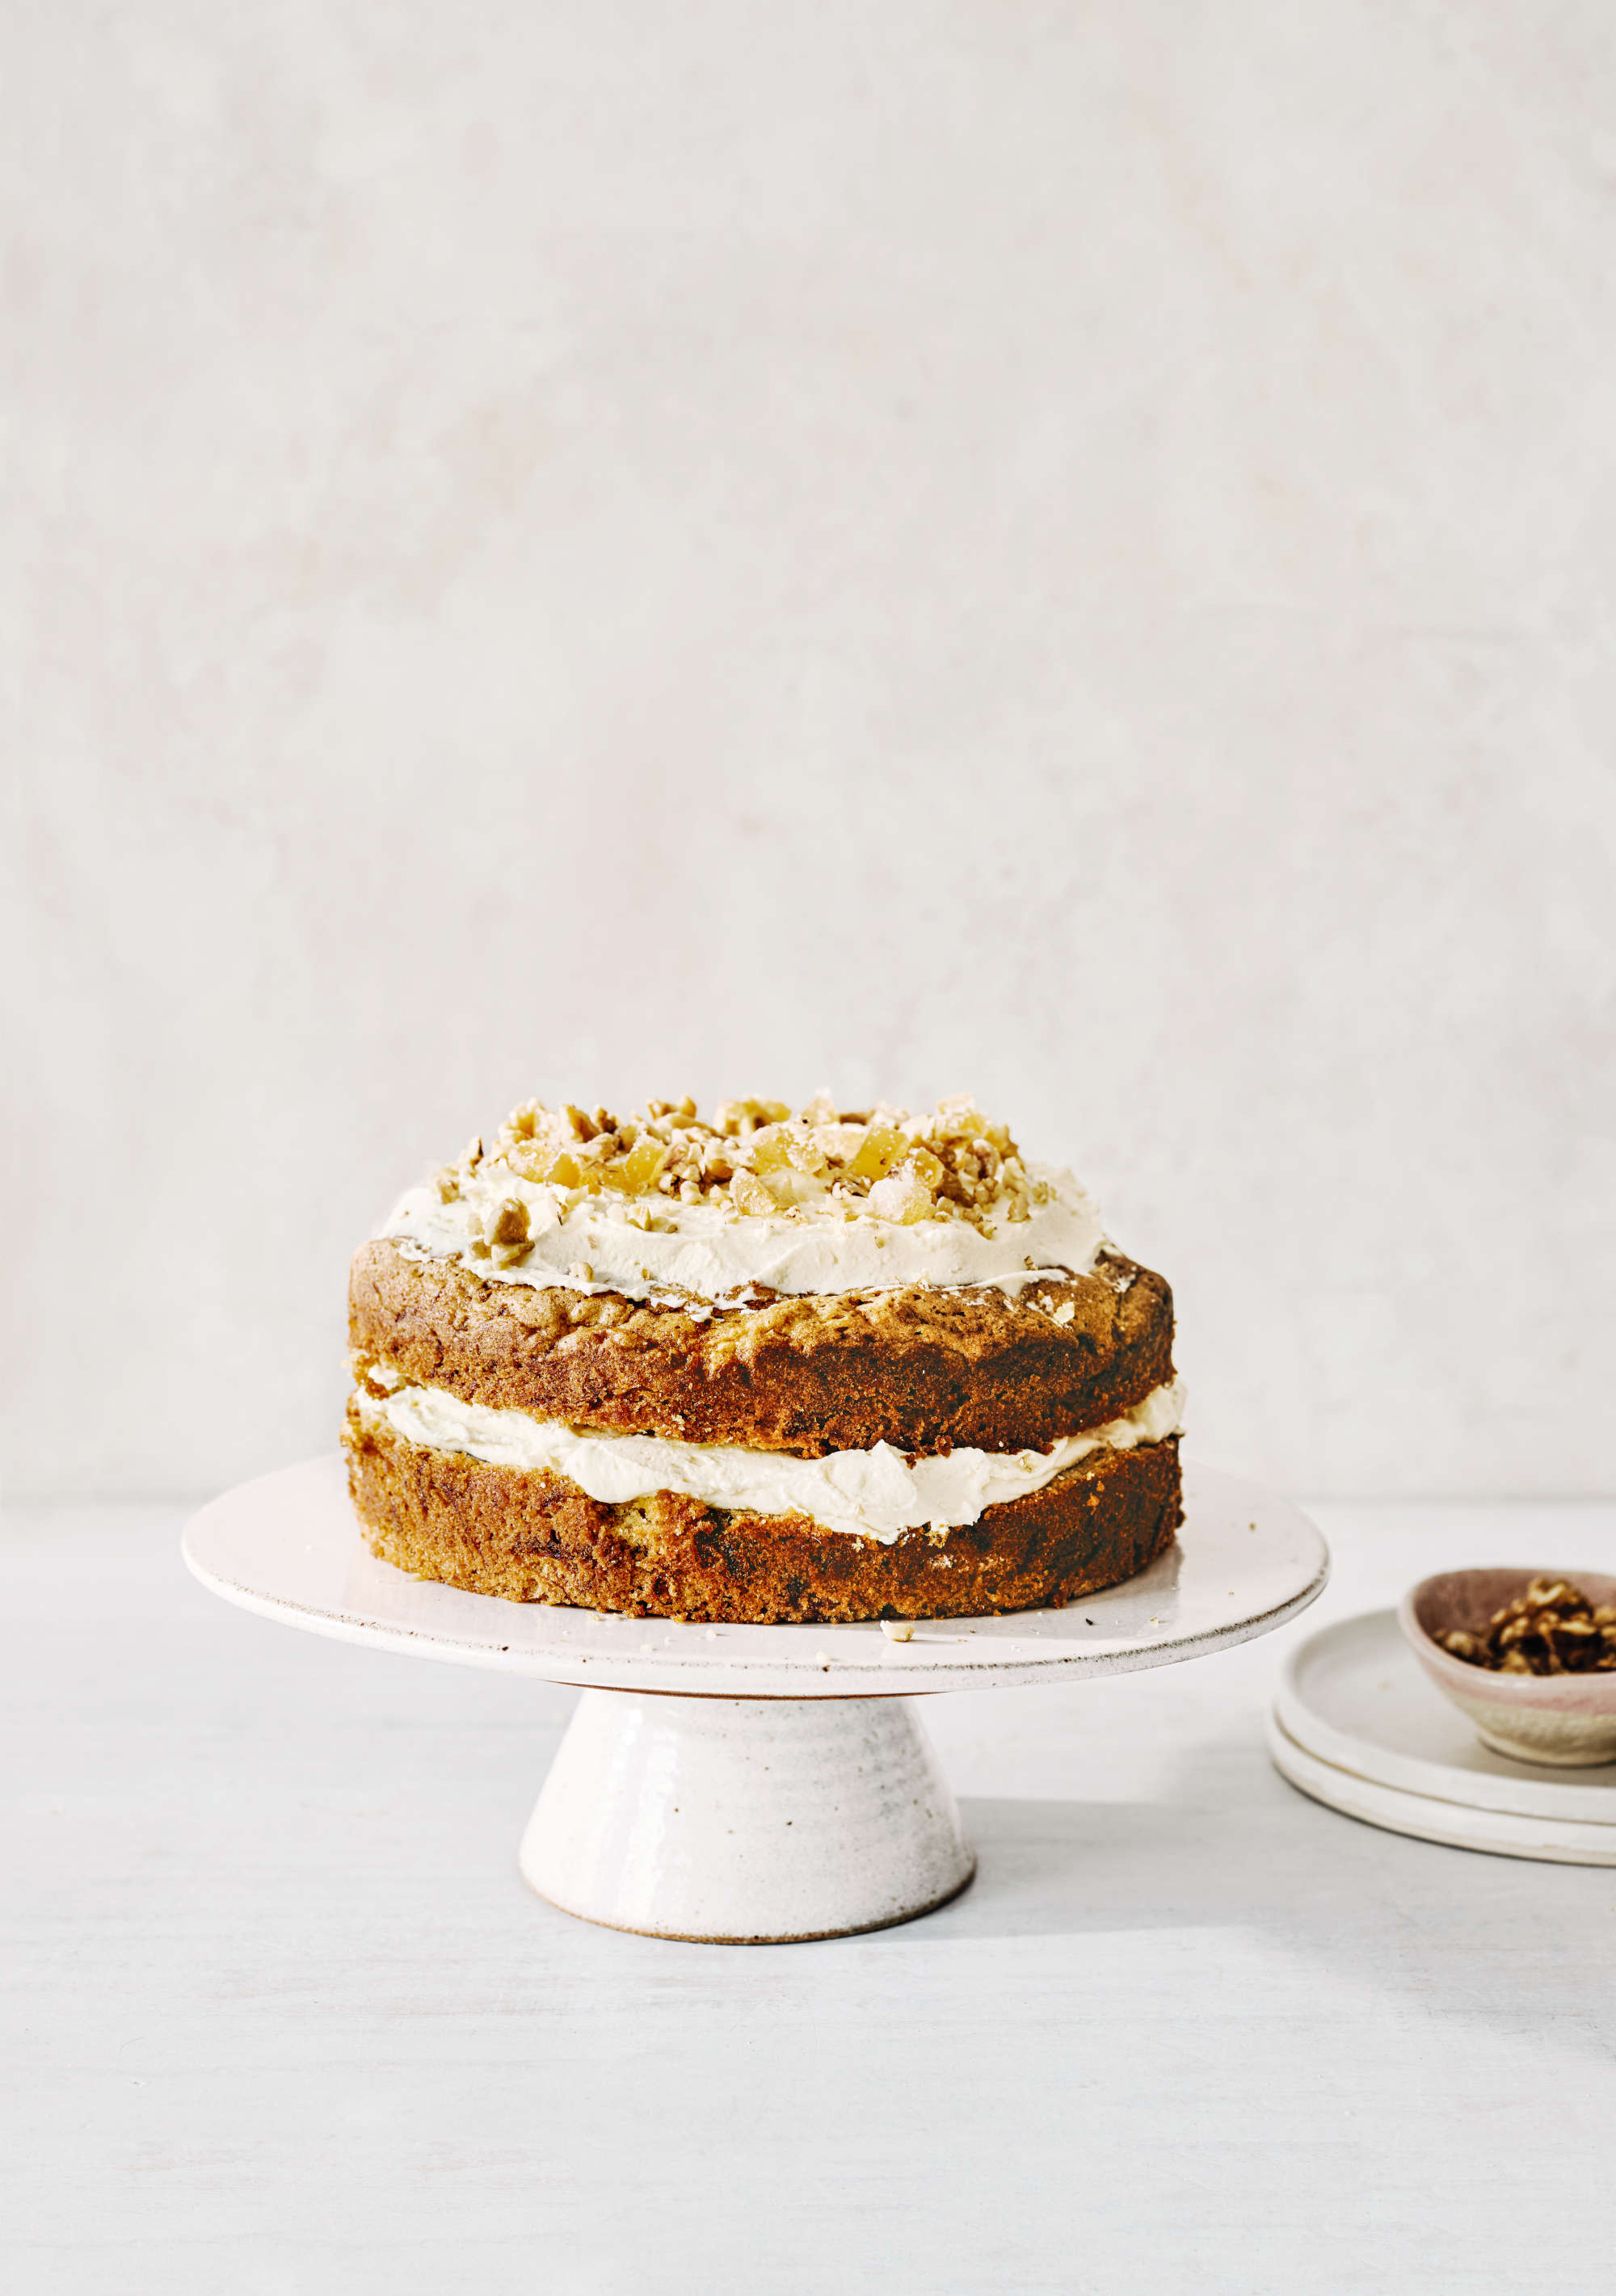 Butter and cream cheese frosting tops this carrot, walnut and candied ginger cake